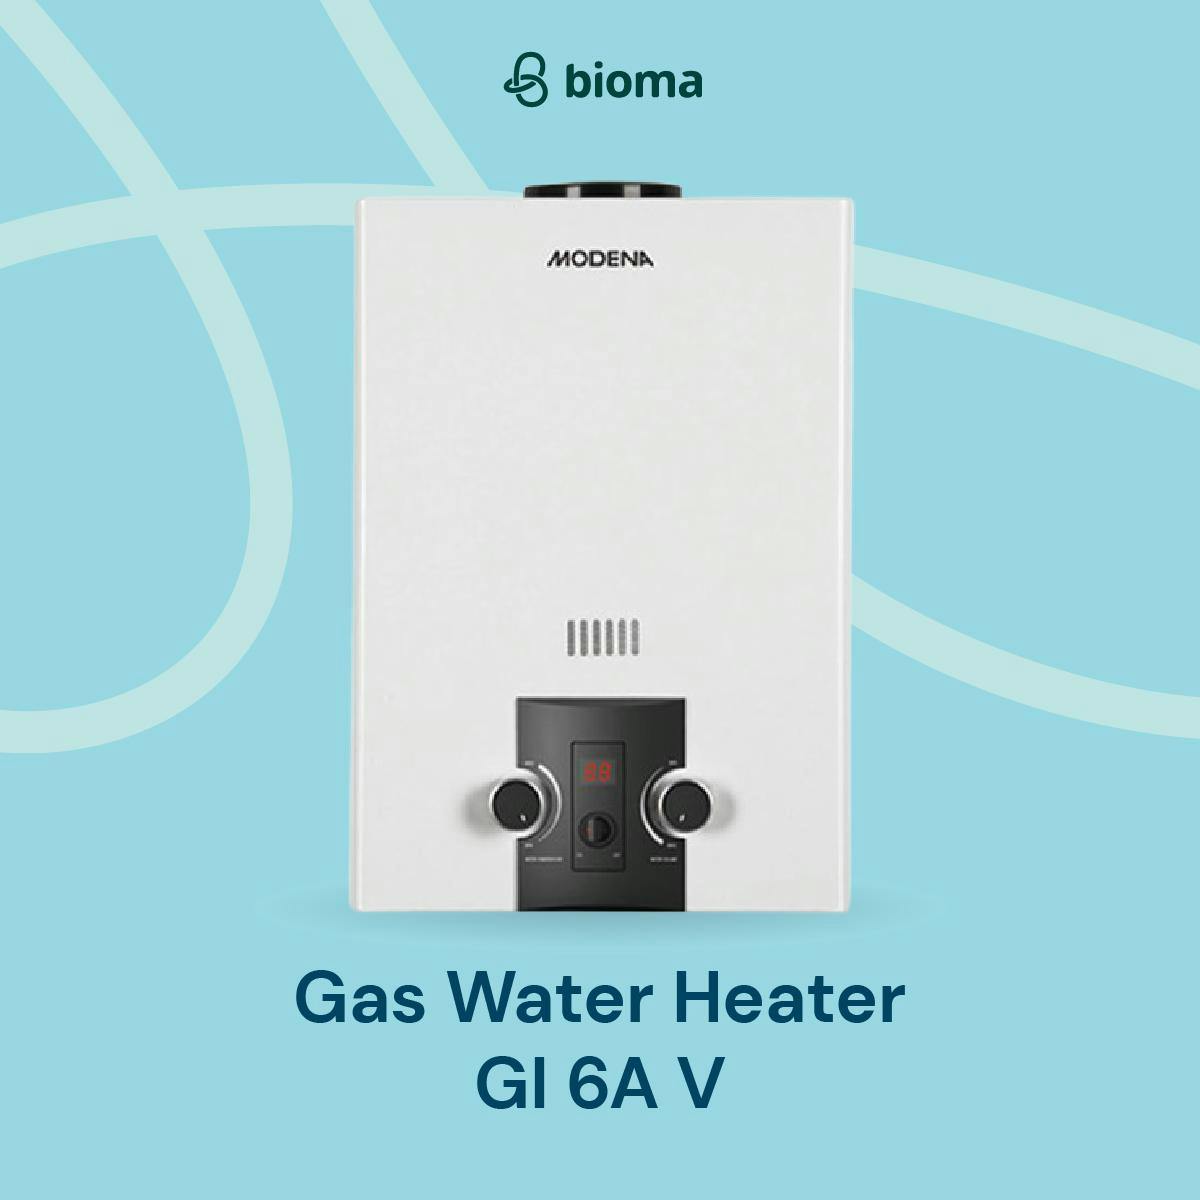 Image 318 Gas Water Heater GI 6A V